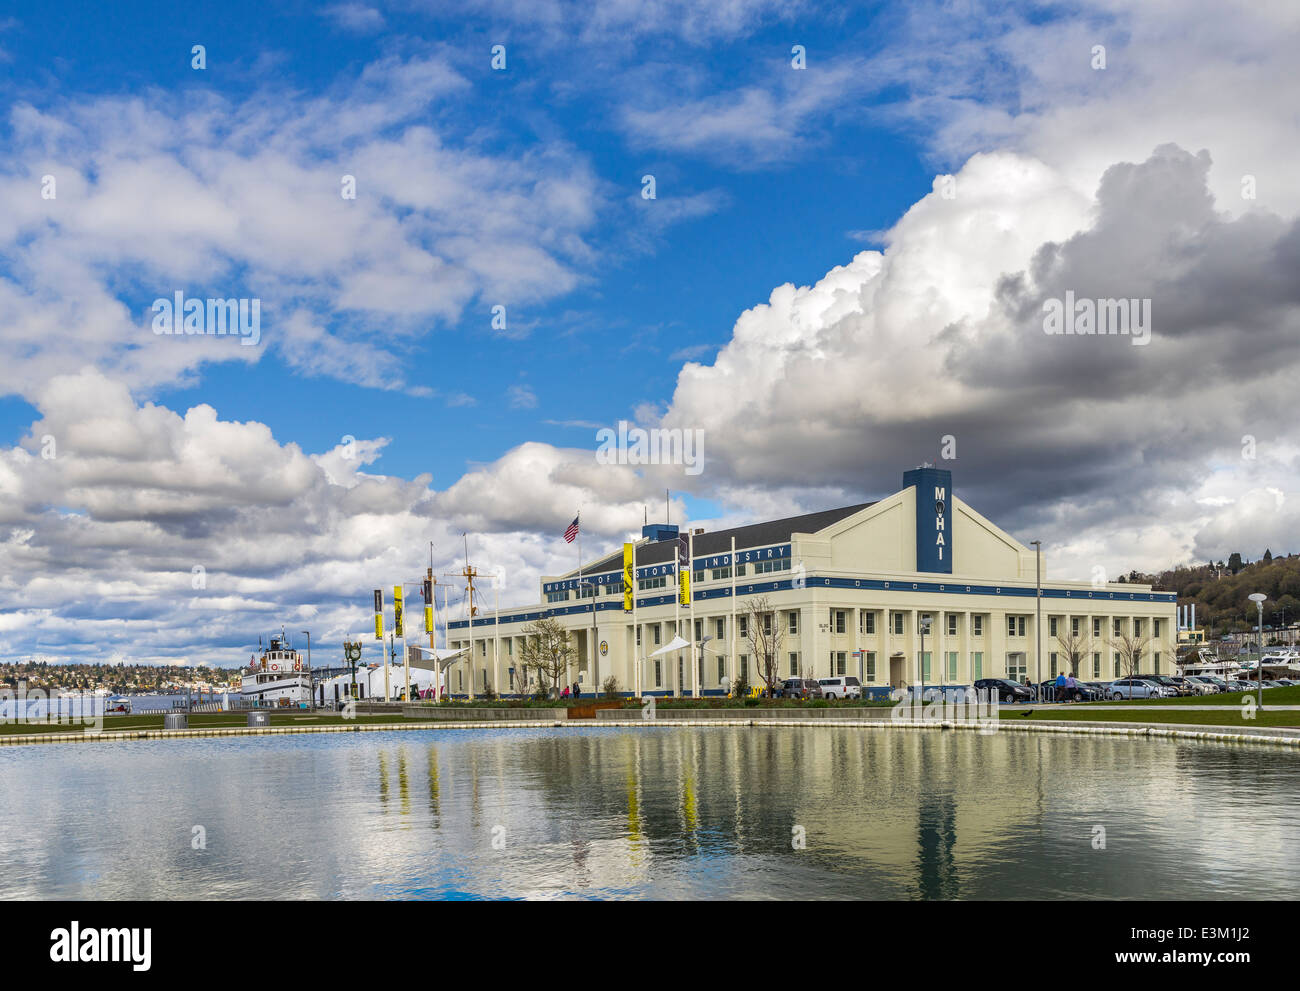 Seattle Washington: Museum of History and Industry and pond reflections at Lake Union Park Stock Photo